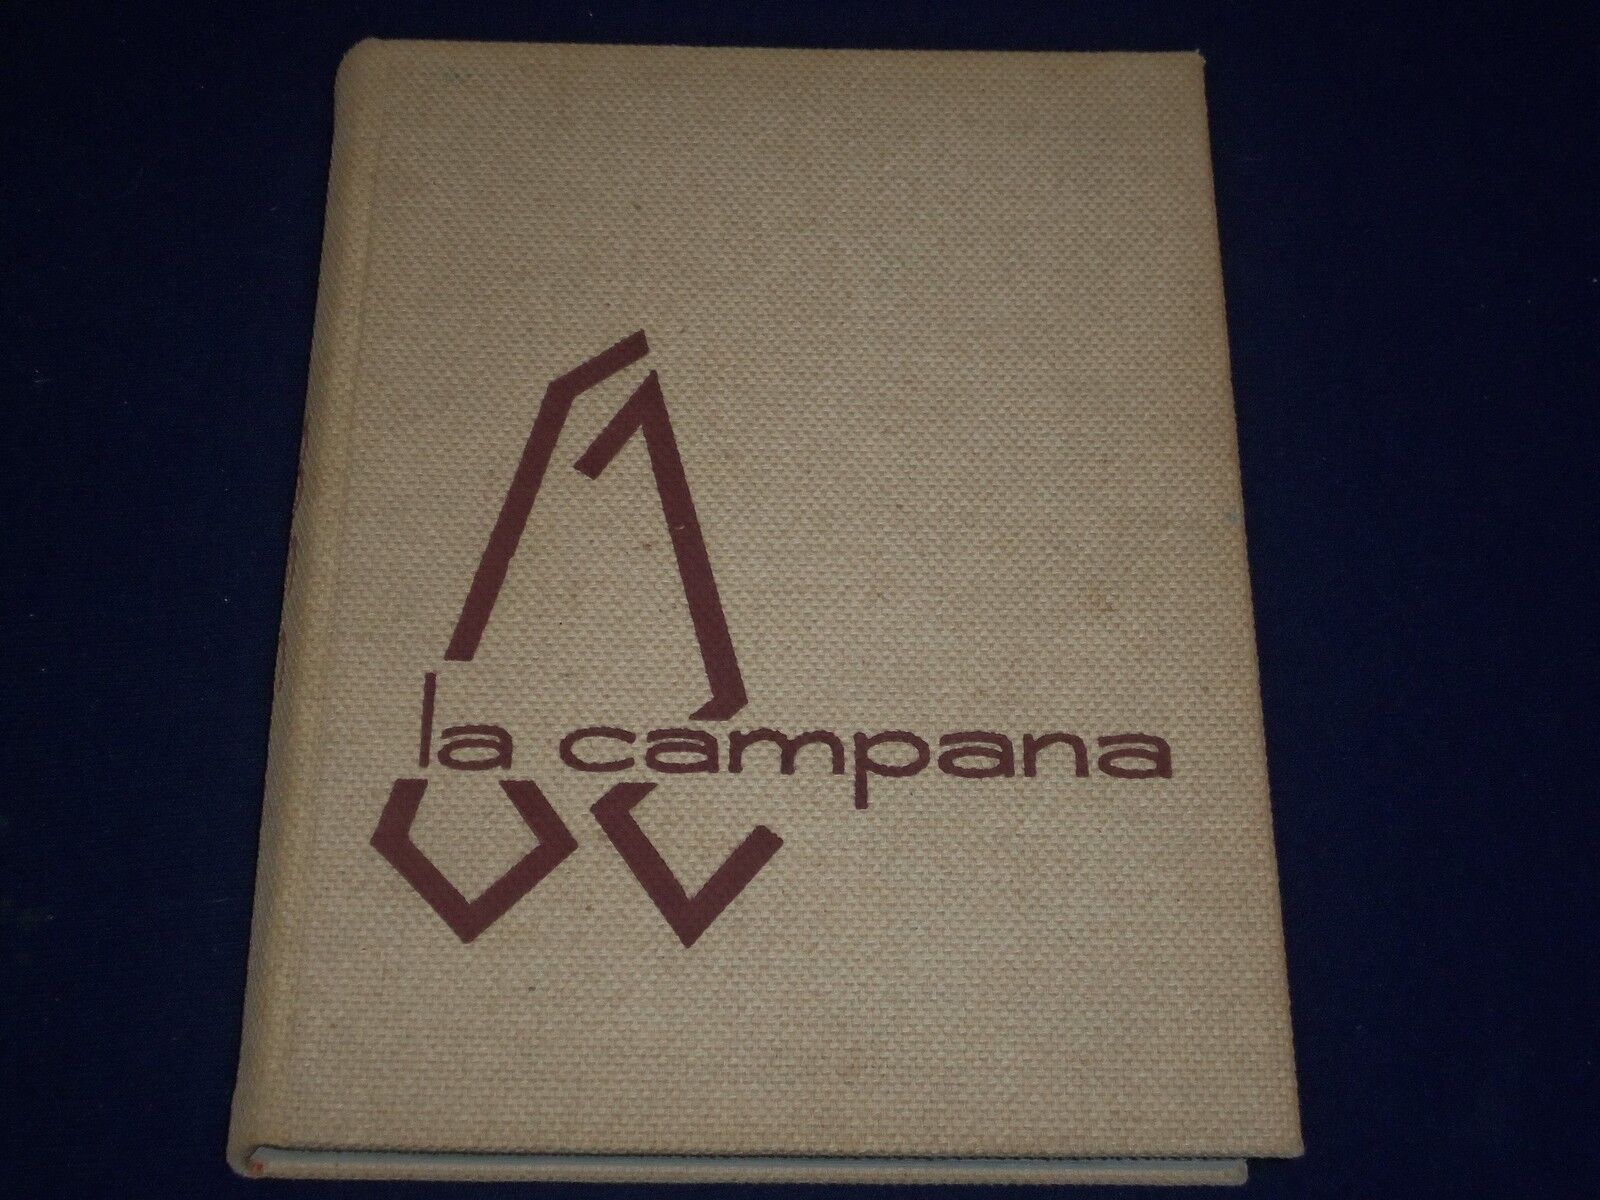 1962 LA CAMPANA MONTCLAIR STATE COLLEGE YEARBOOK - GREAT PHOTOS - YB 466